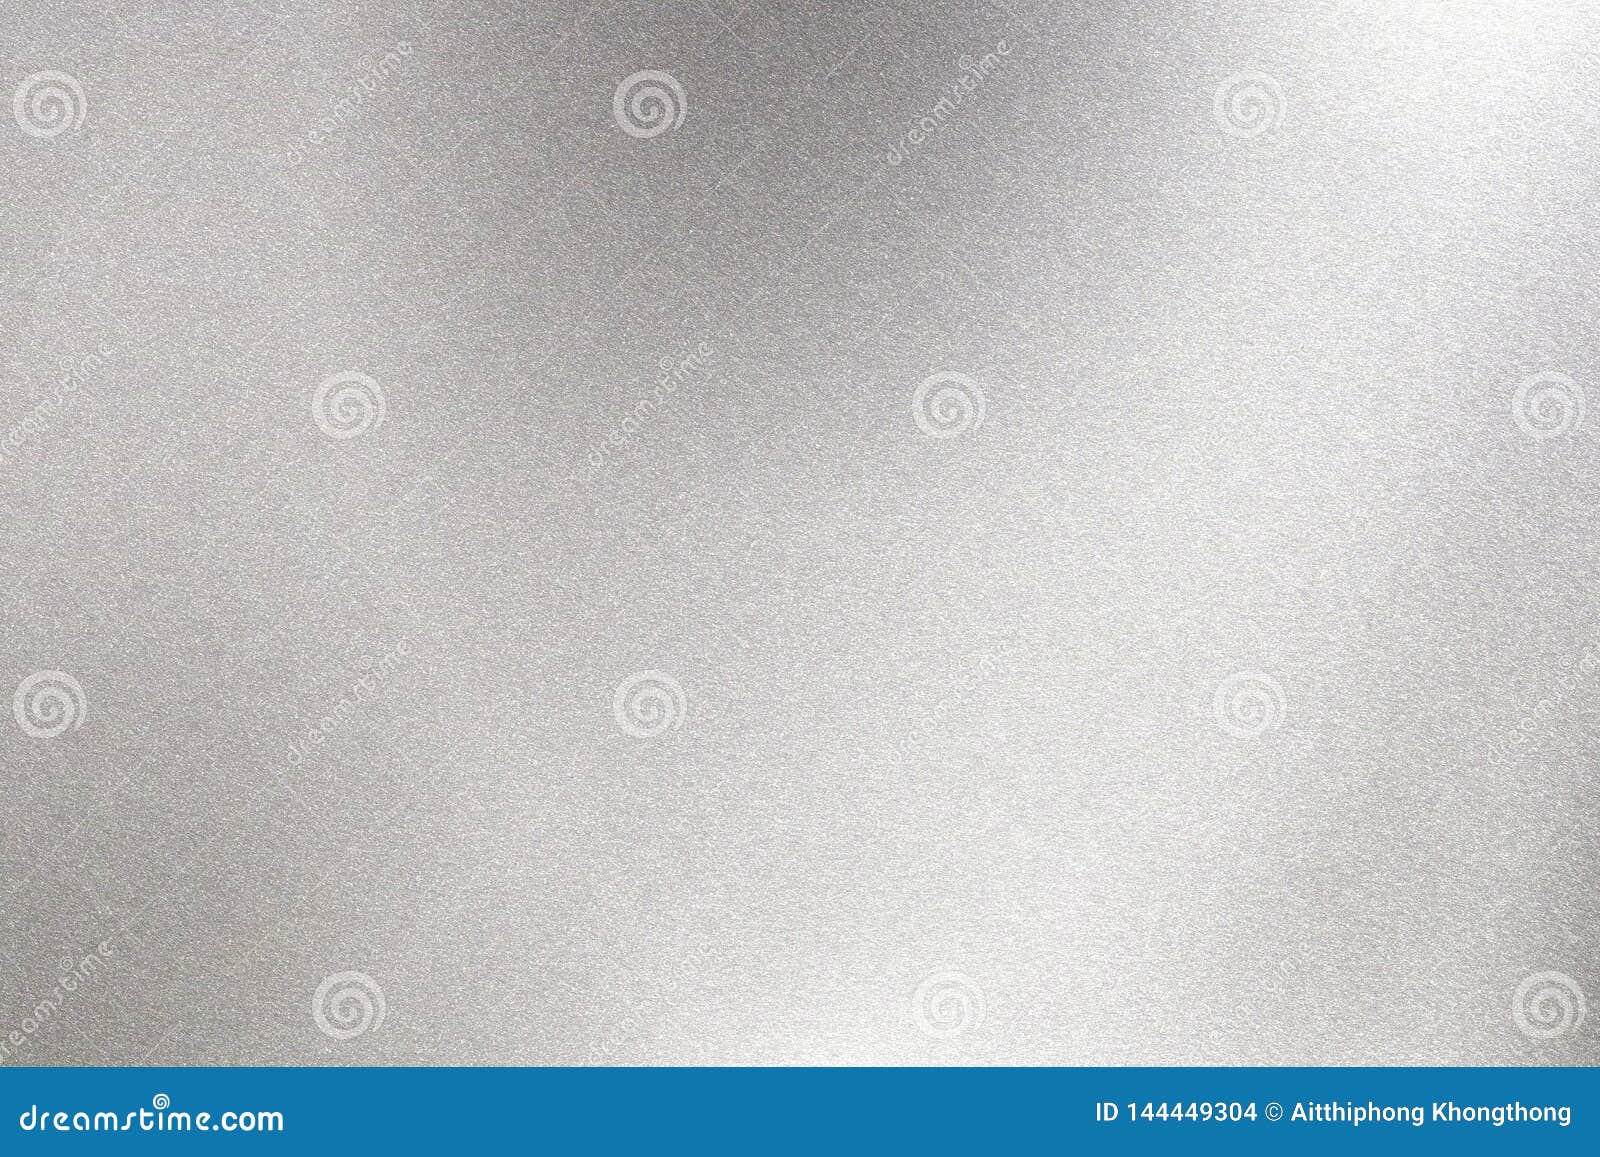 Abstract Texture Background, Light Shining on Rough Stainless Steel ...